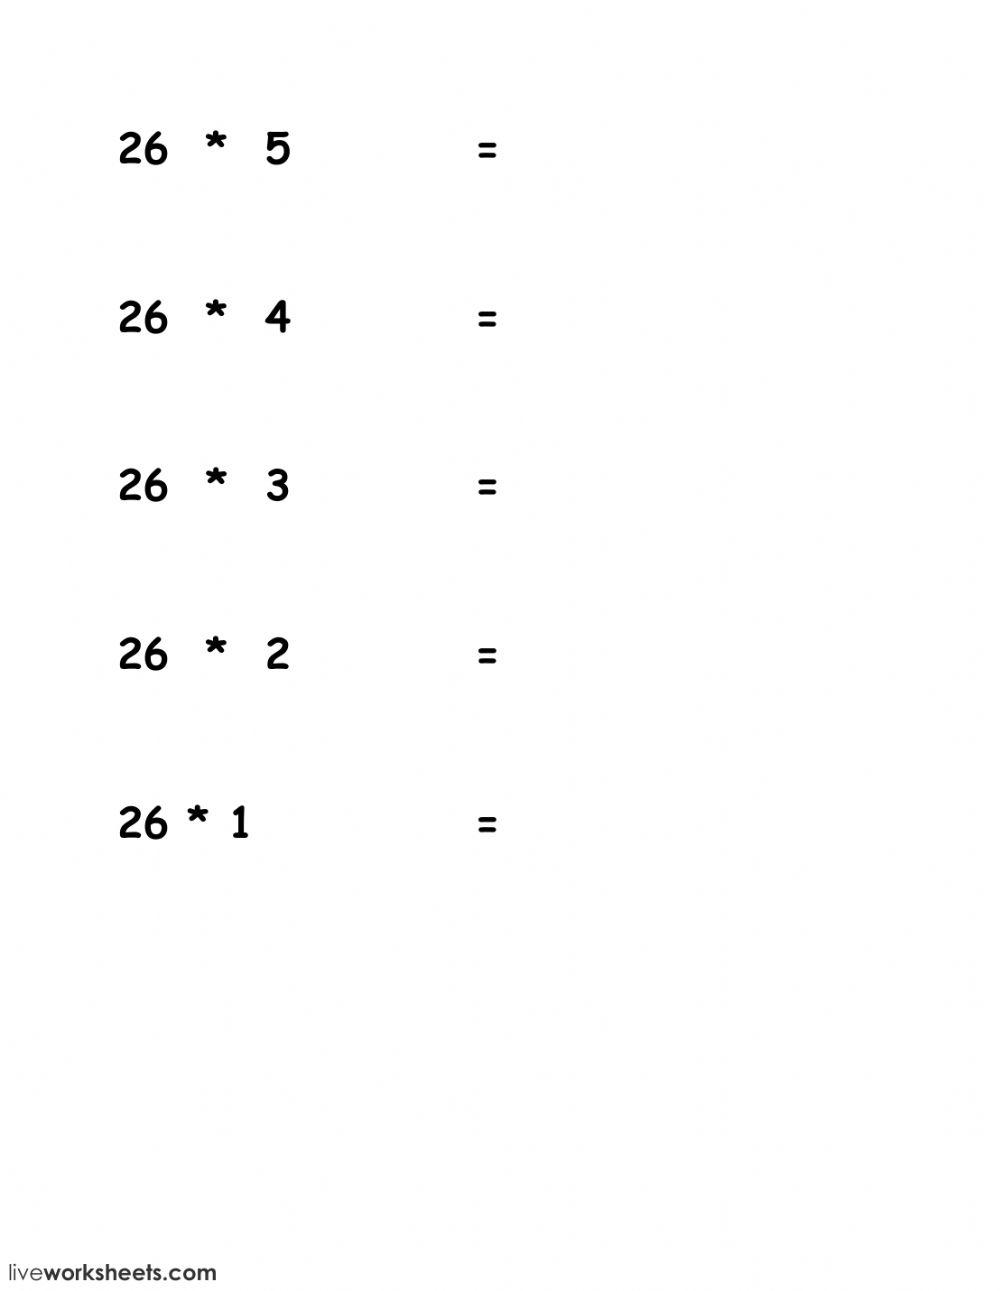 26 times table